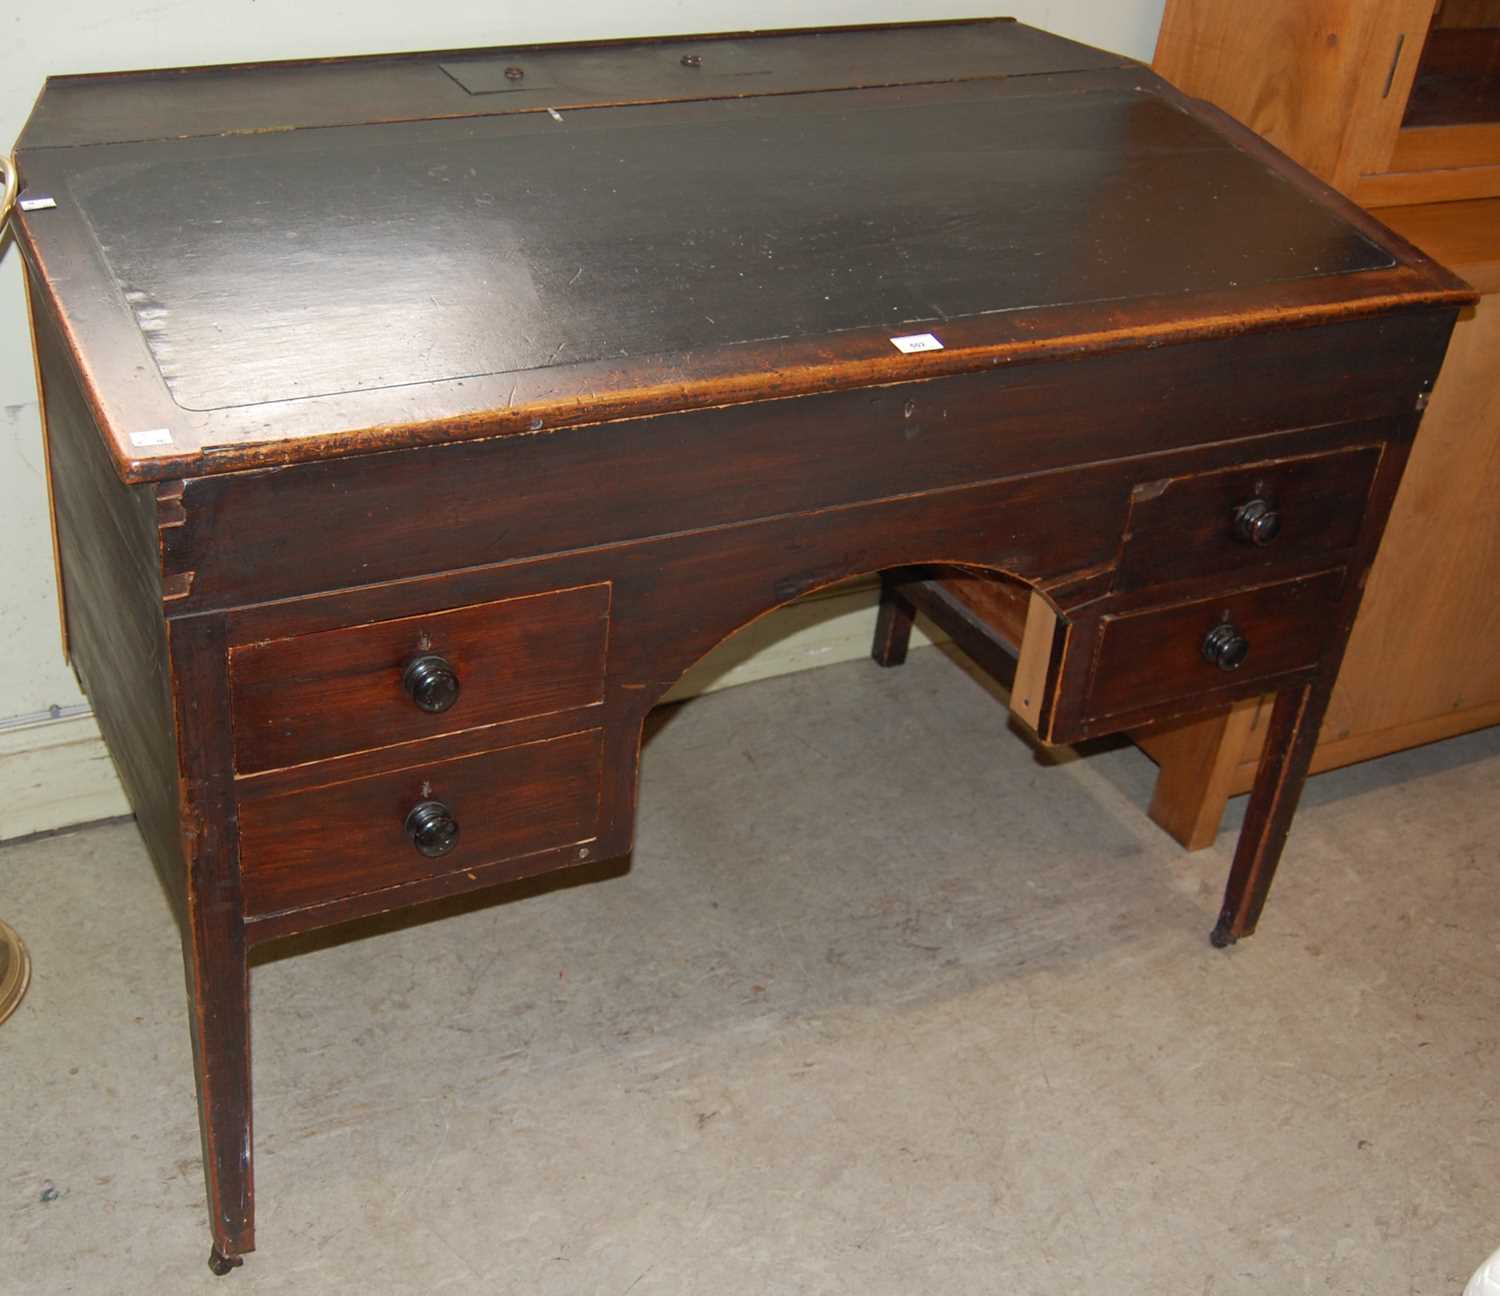 A 19th century stained pine estate desk with two detachable square-shaped covers revealing